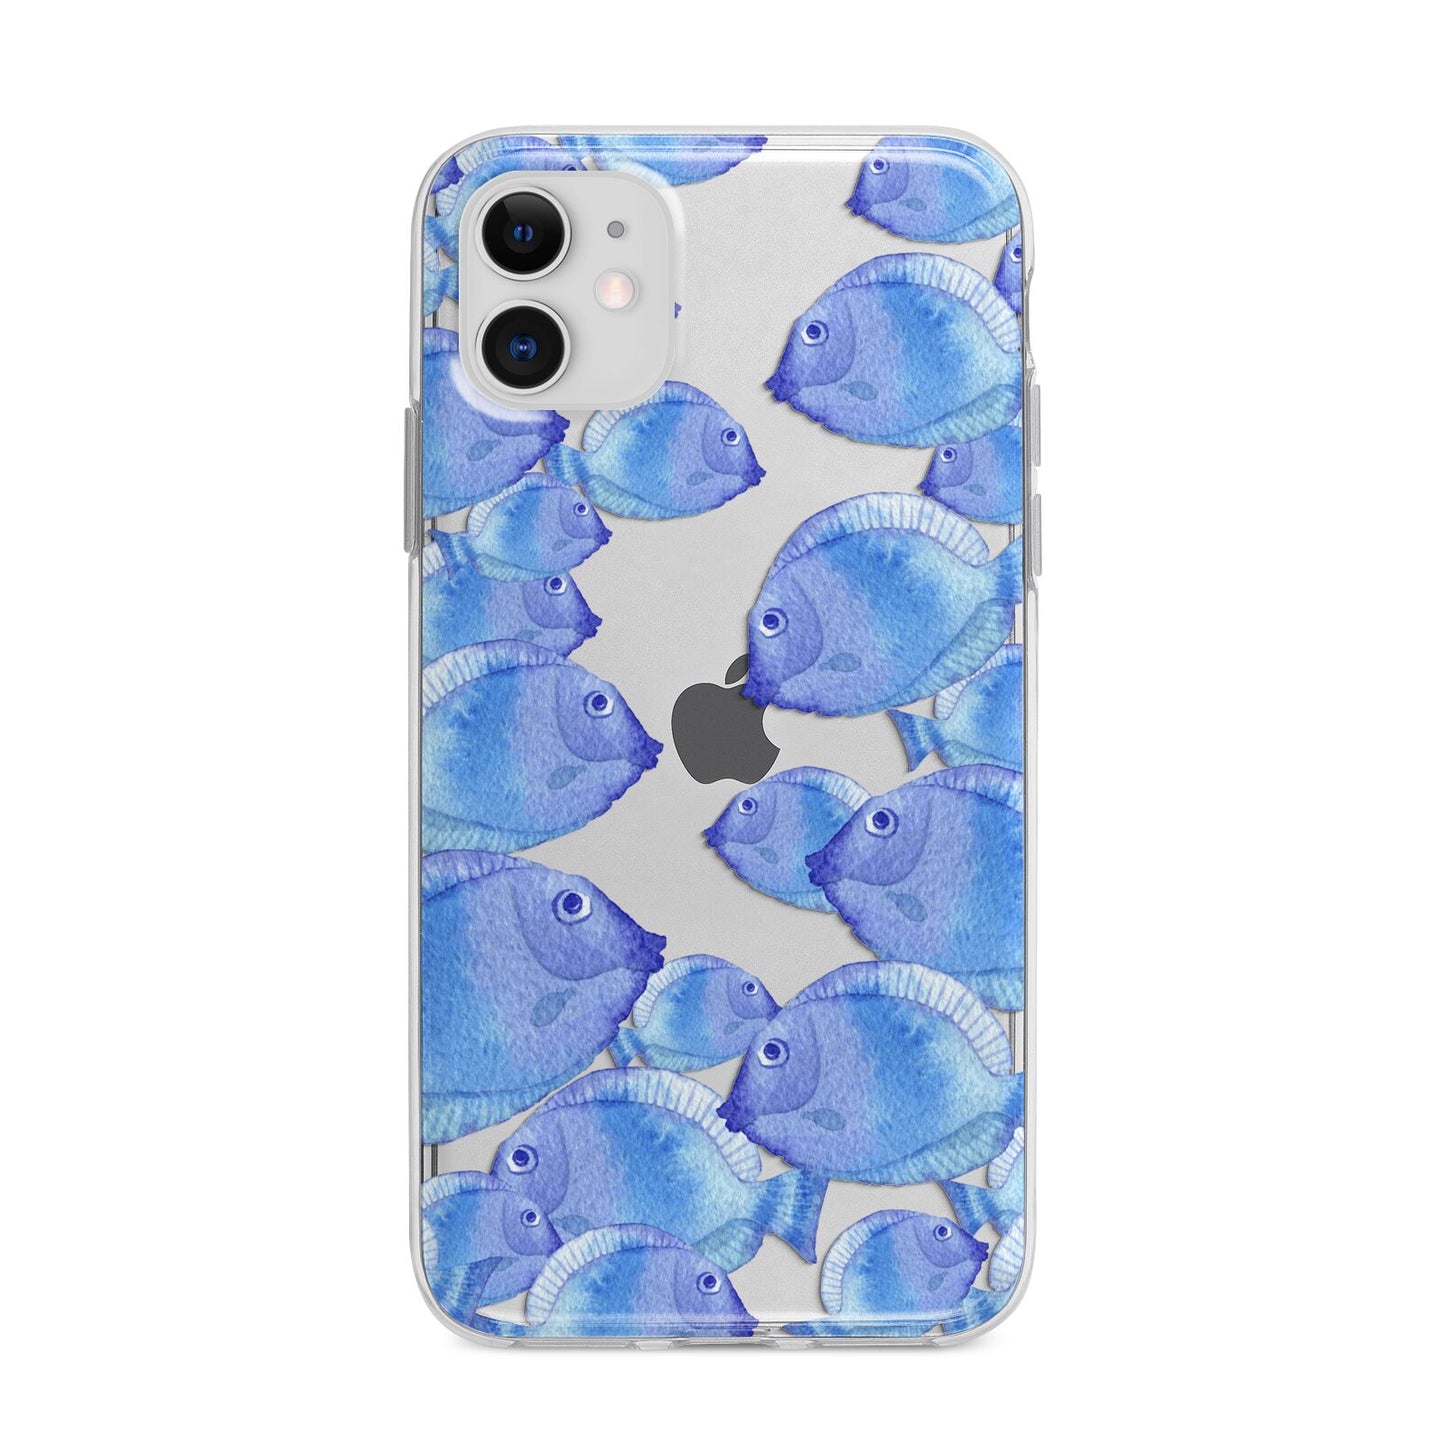 Fish Apple iPhone 11 in White with Bumper Case